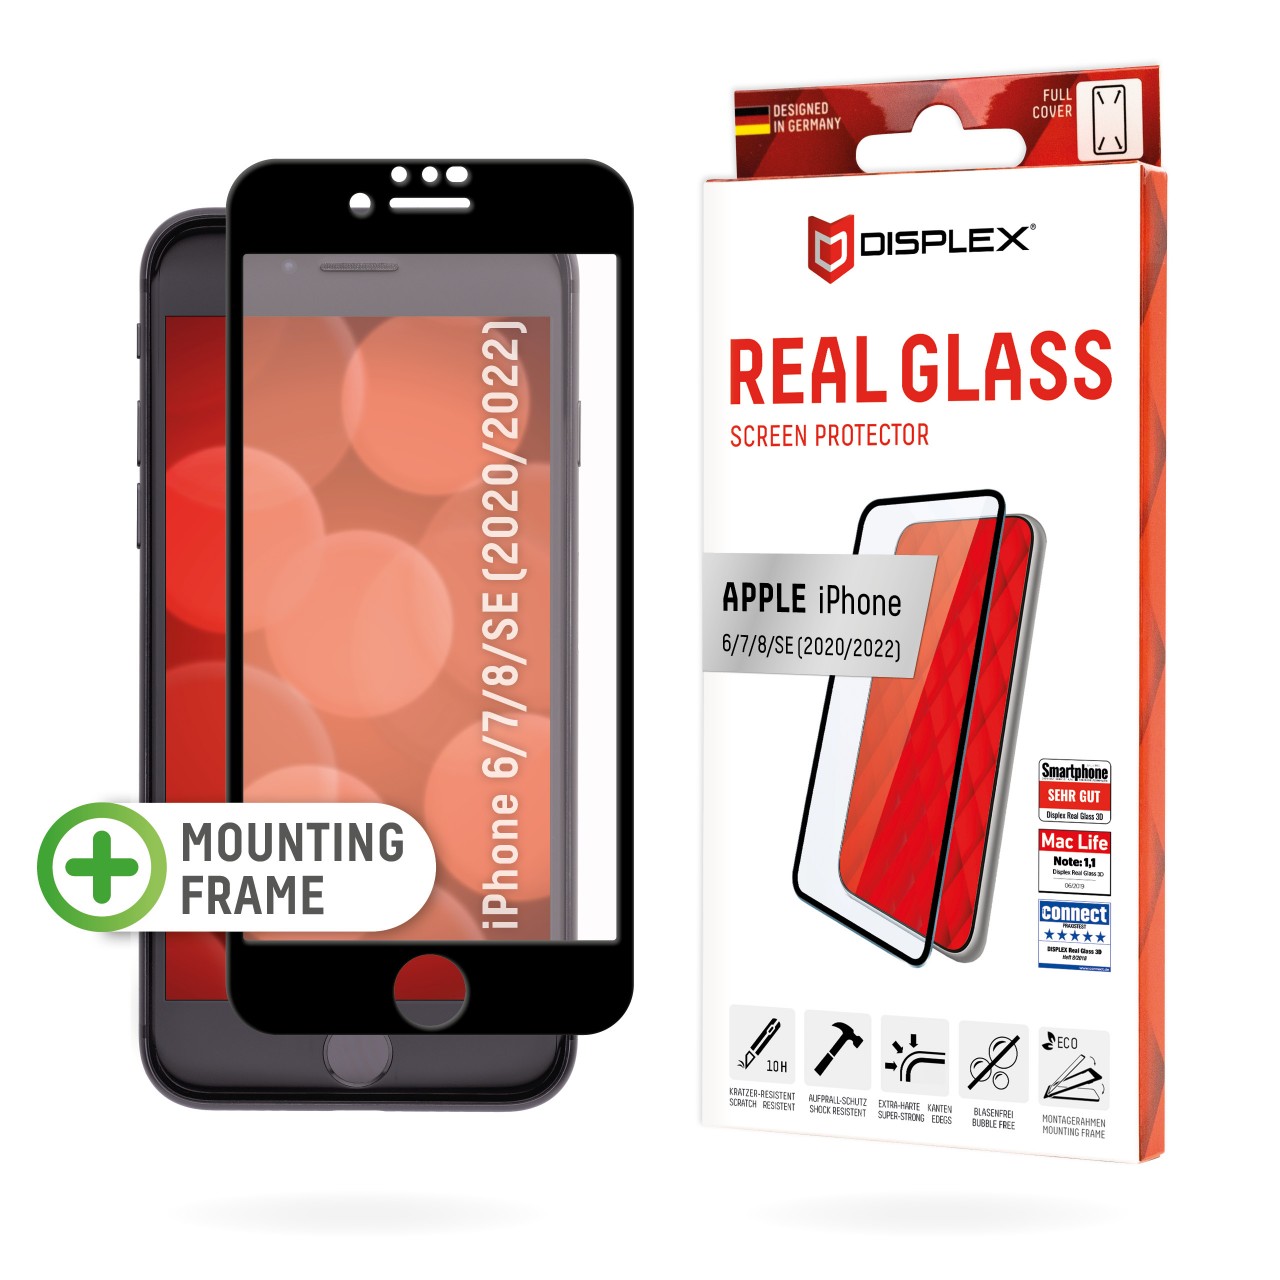 iPhone 6/7/8/SE (2020/2022) Full Cover Glass